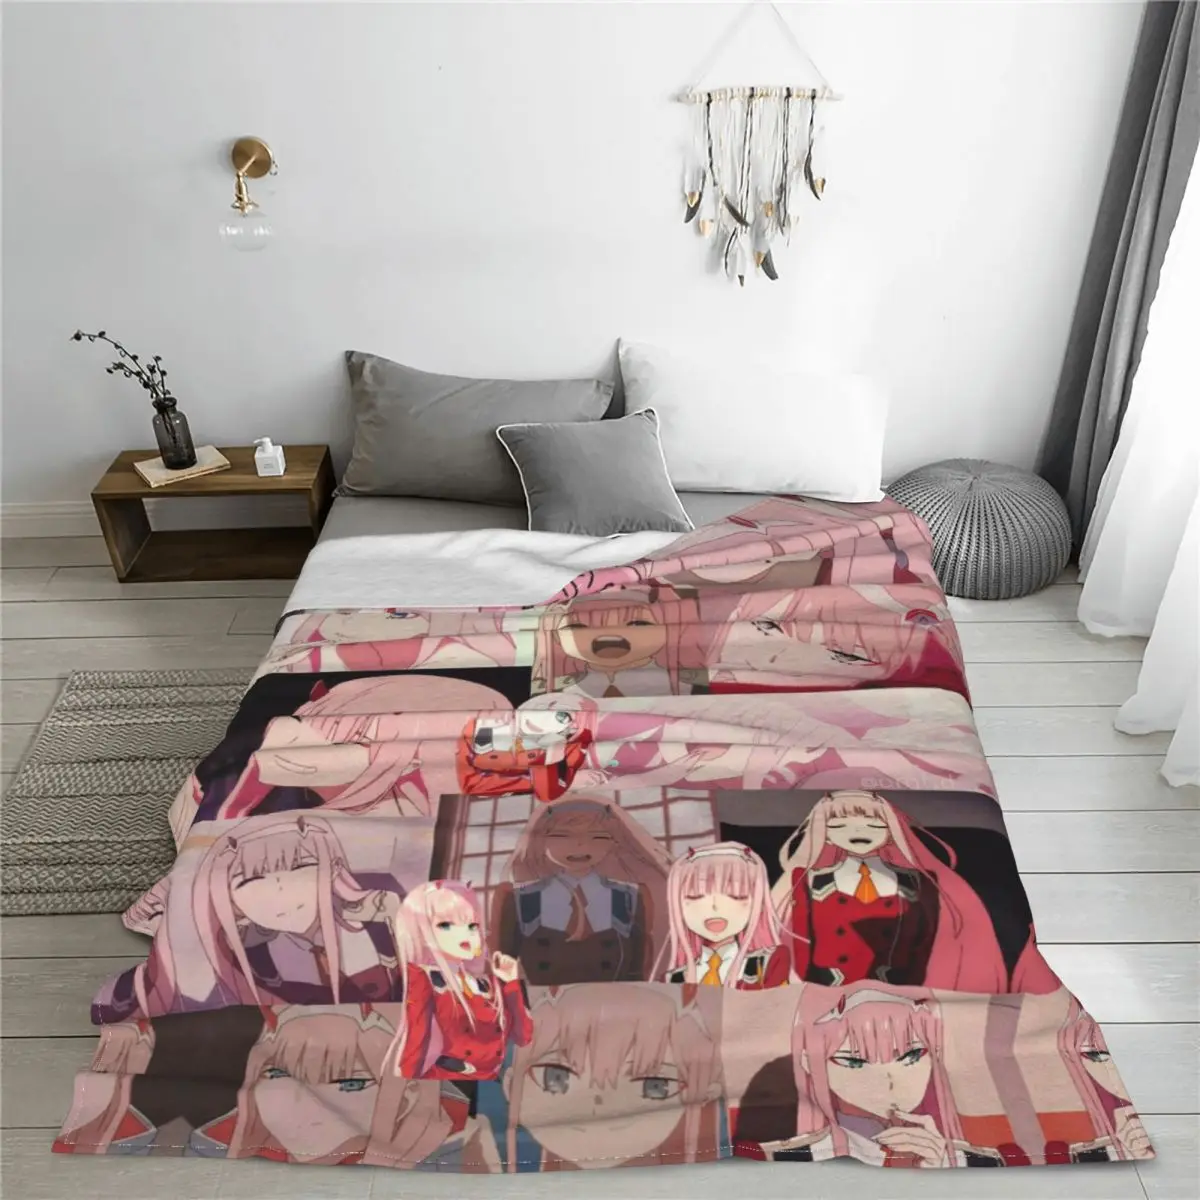 Details about   59"X79'' Anime DARLING in the FRANXX 02 Flannel Bed Warm Throw Blanket Cos#R1437 